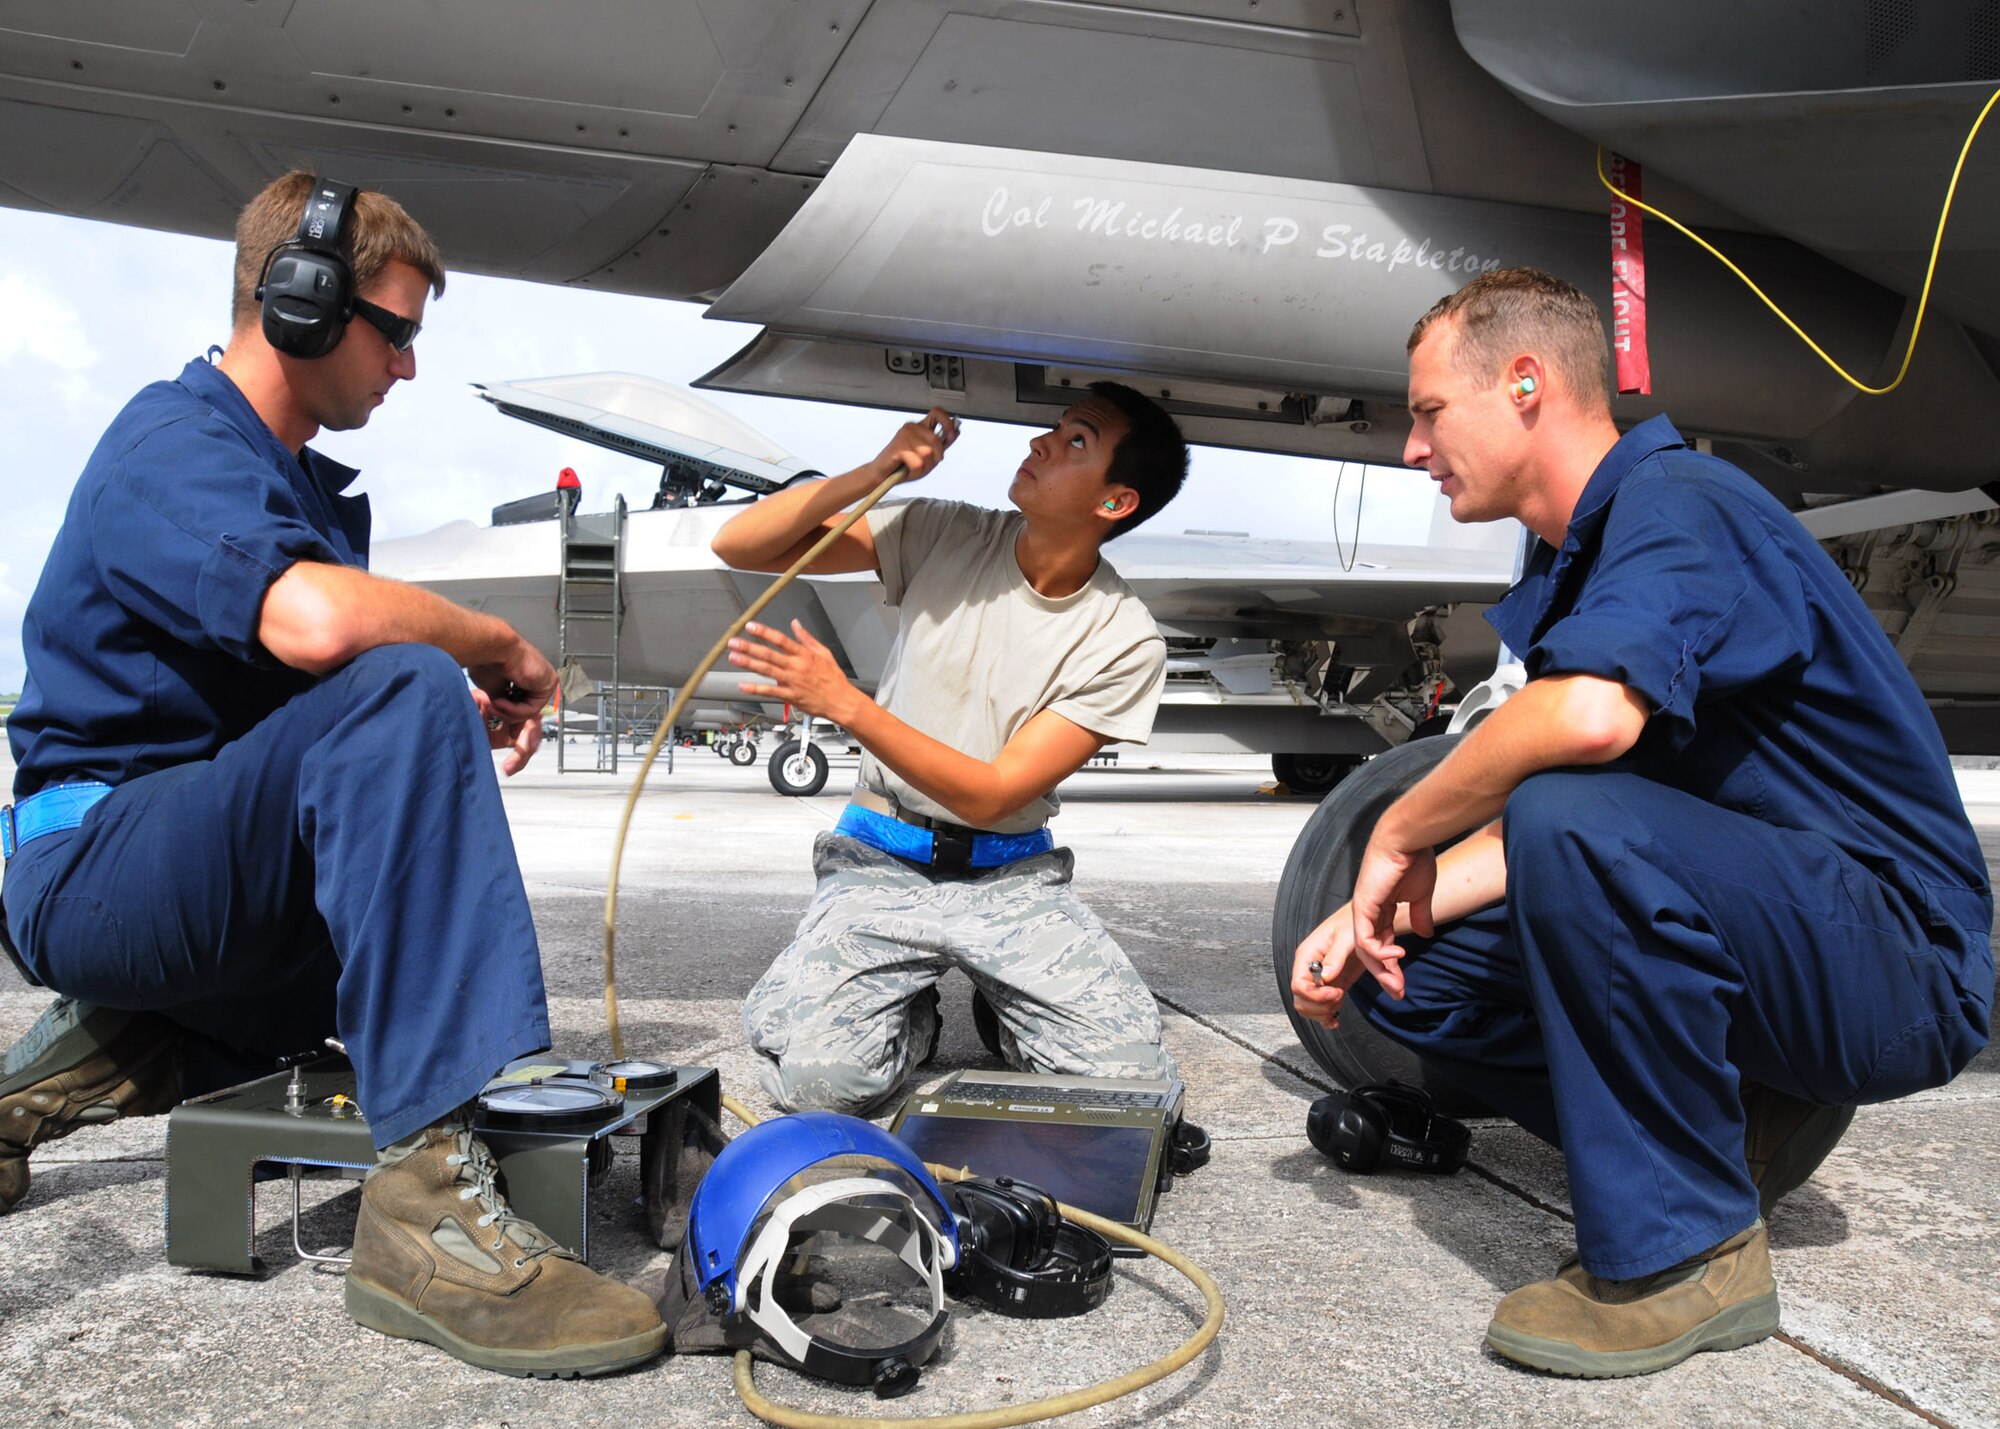 ANDERSEN AIR FORCE BASE, Guam - Crew chiefs Staff Sgt. Zachary Braddock, Airman 1st Class Ryan Pottmeyer and Airman 1st Class Jonathon Sladek, conduct routine maintenance on an F-22 Raptor here Sept. 13. The Airmen are from the 49th Air Craft Maintenance Squadron, Holloman Air Force Base, N.M., are participating in Valiant Shield 2010, a U.S. Pacific Command exercise, from September 12 to 21. The exercise focuses on integrated joint training and interoperability among U.S. military forces while responding to a range of mission scenarios. (U.S. Air Force photo by Senior Airman Nichelle Anderson)